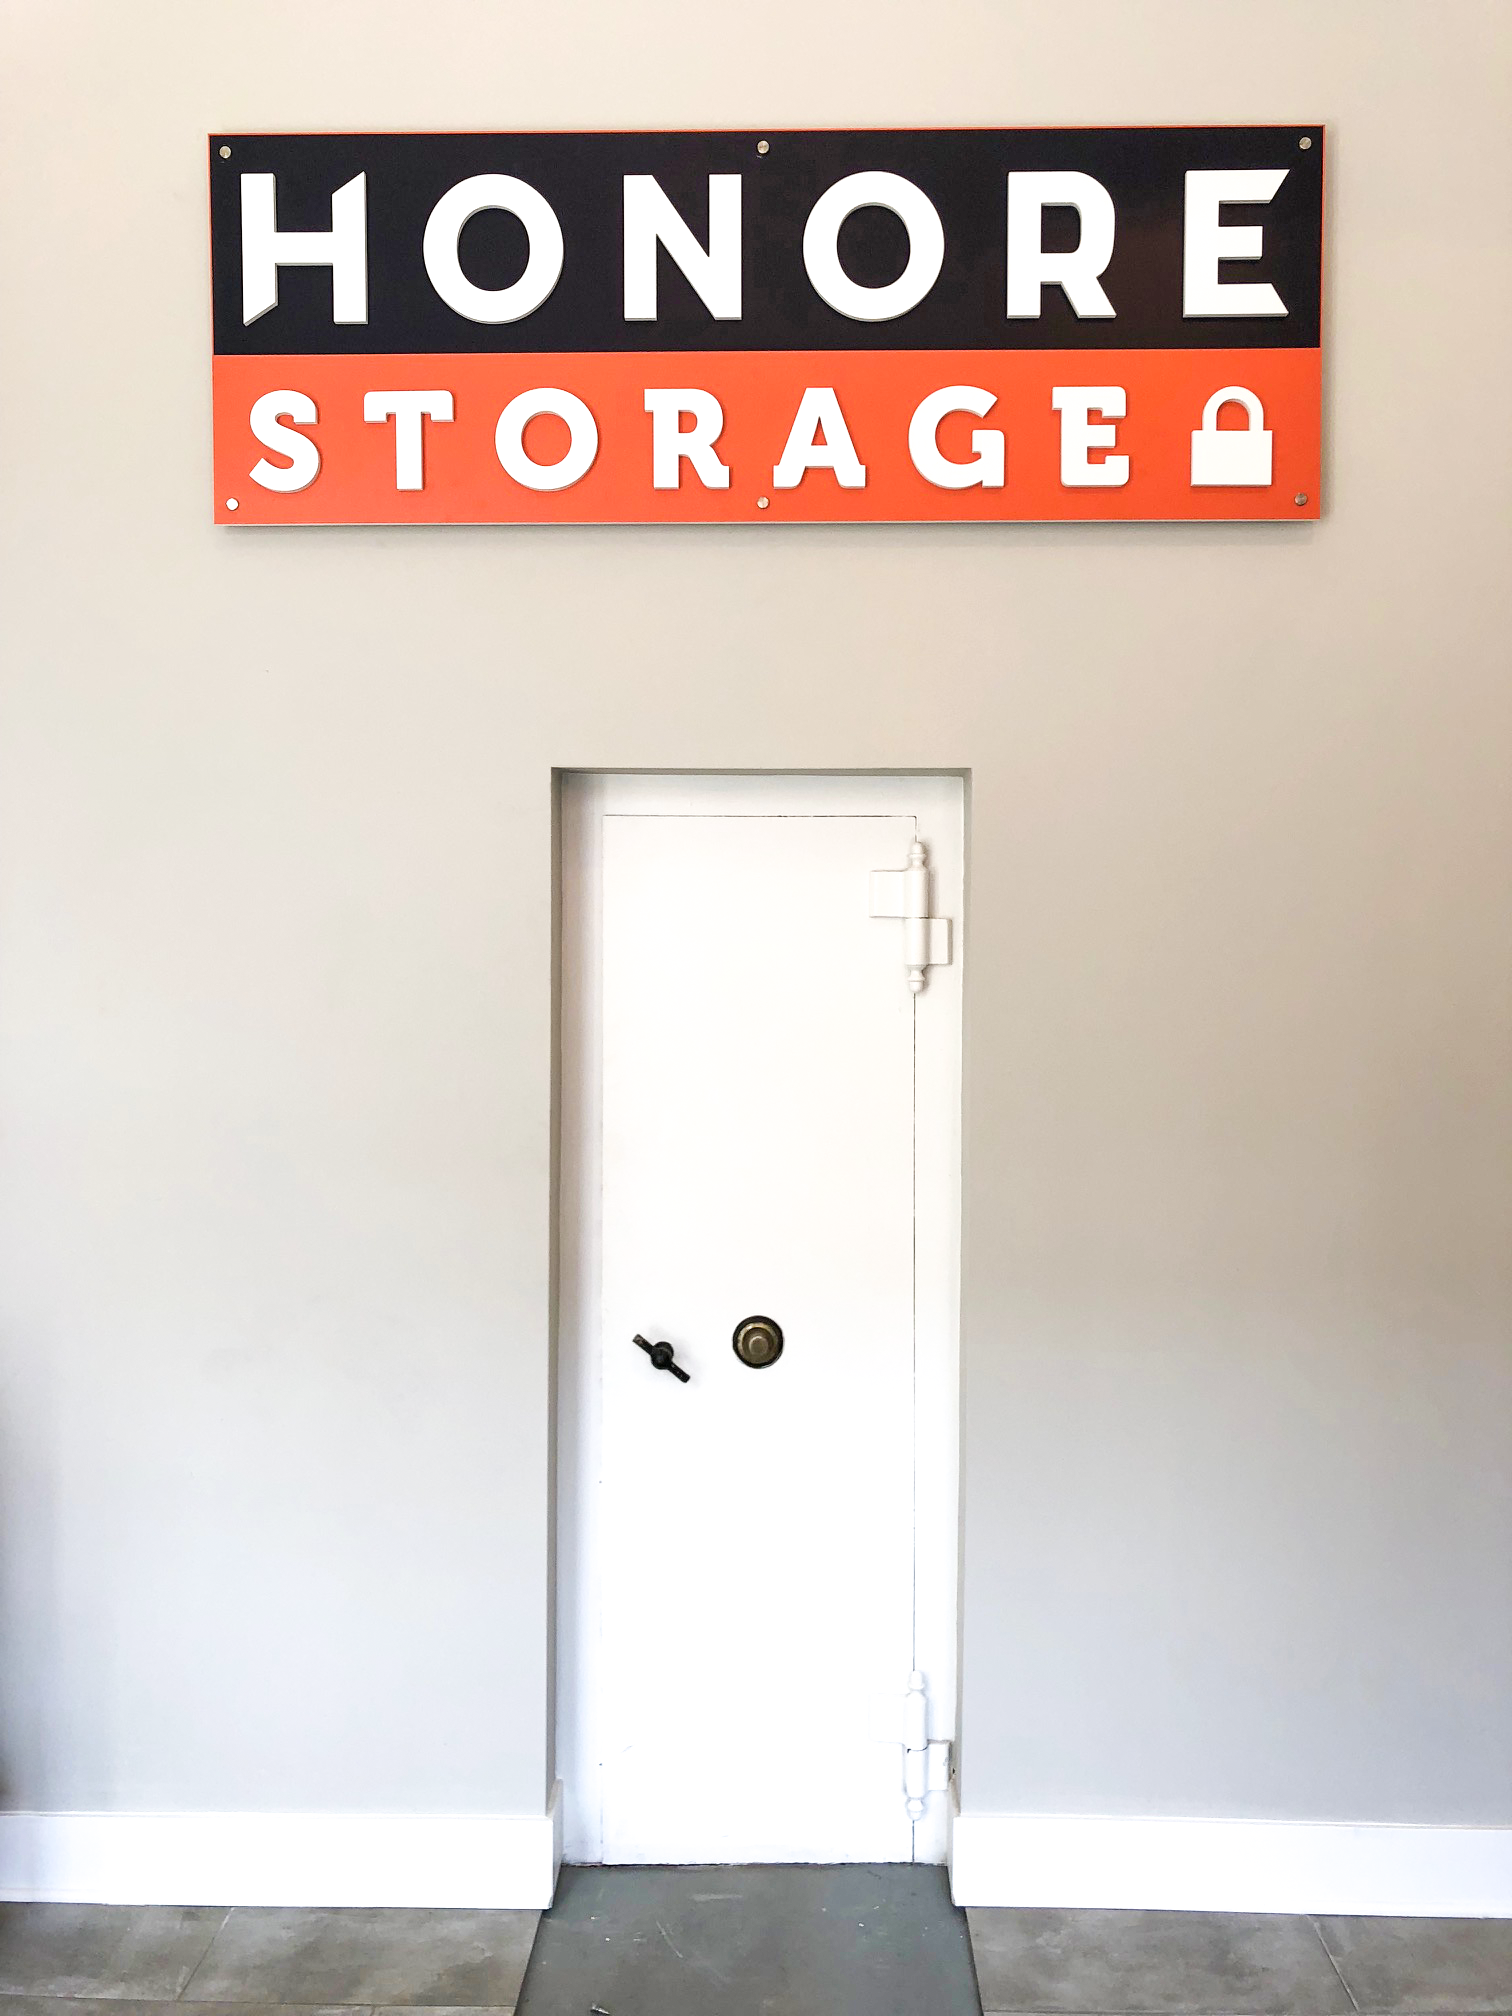 Honore Storage sign